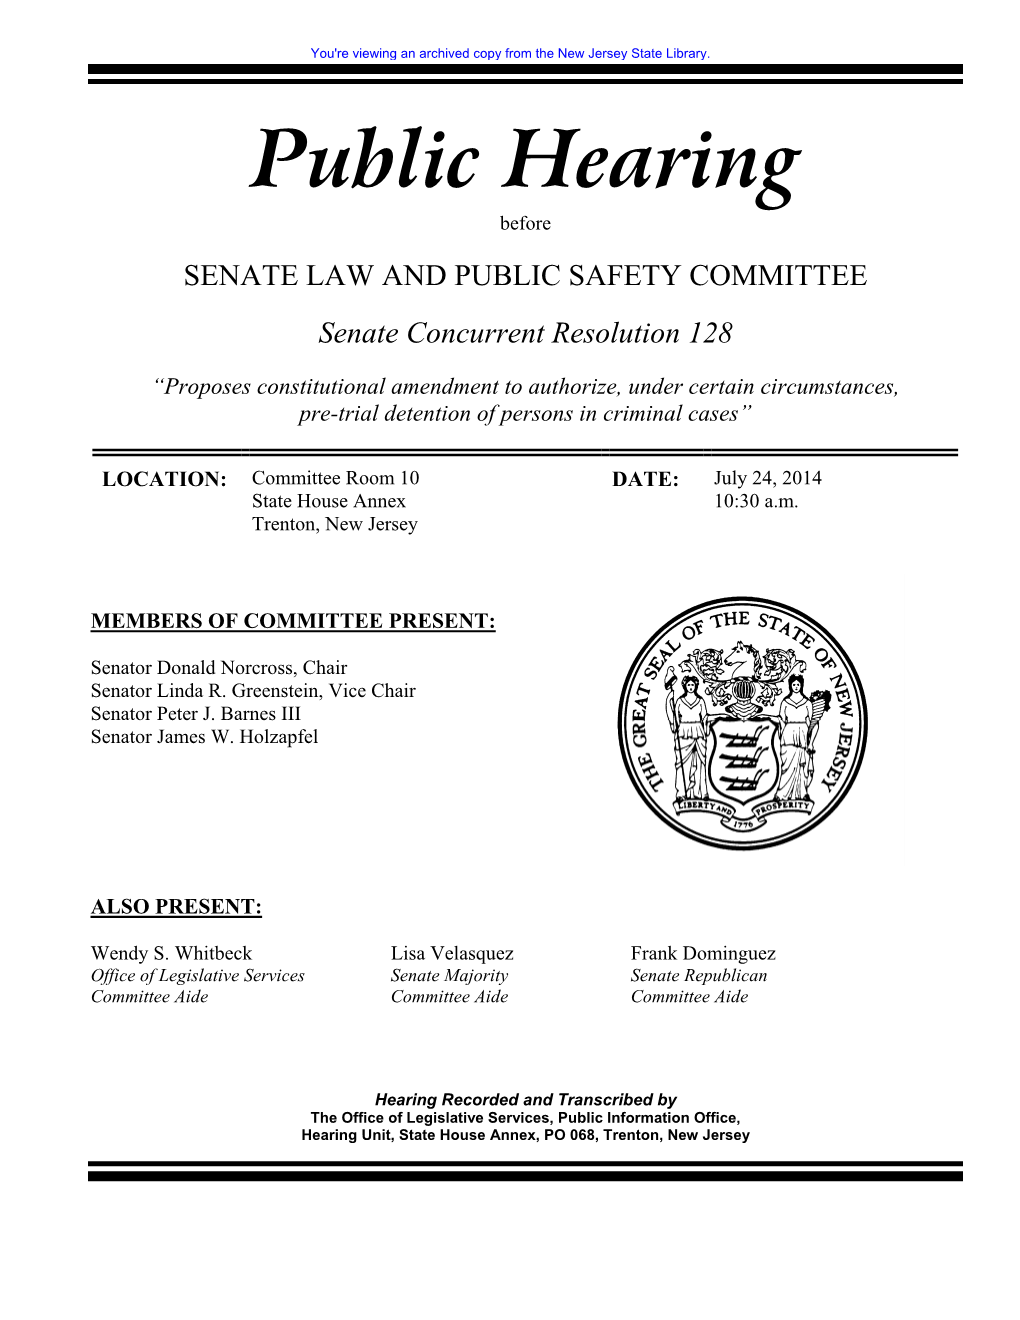 Public Hearing Before